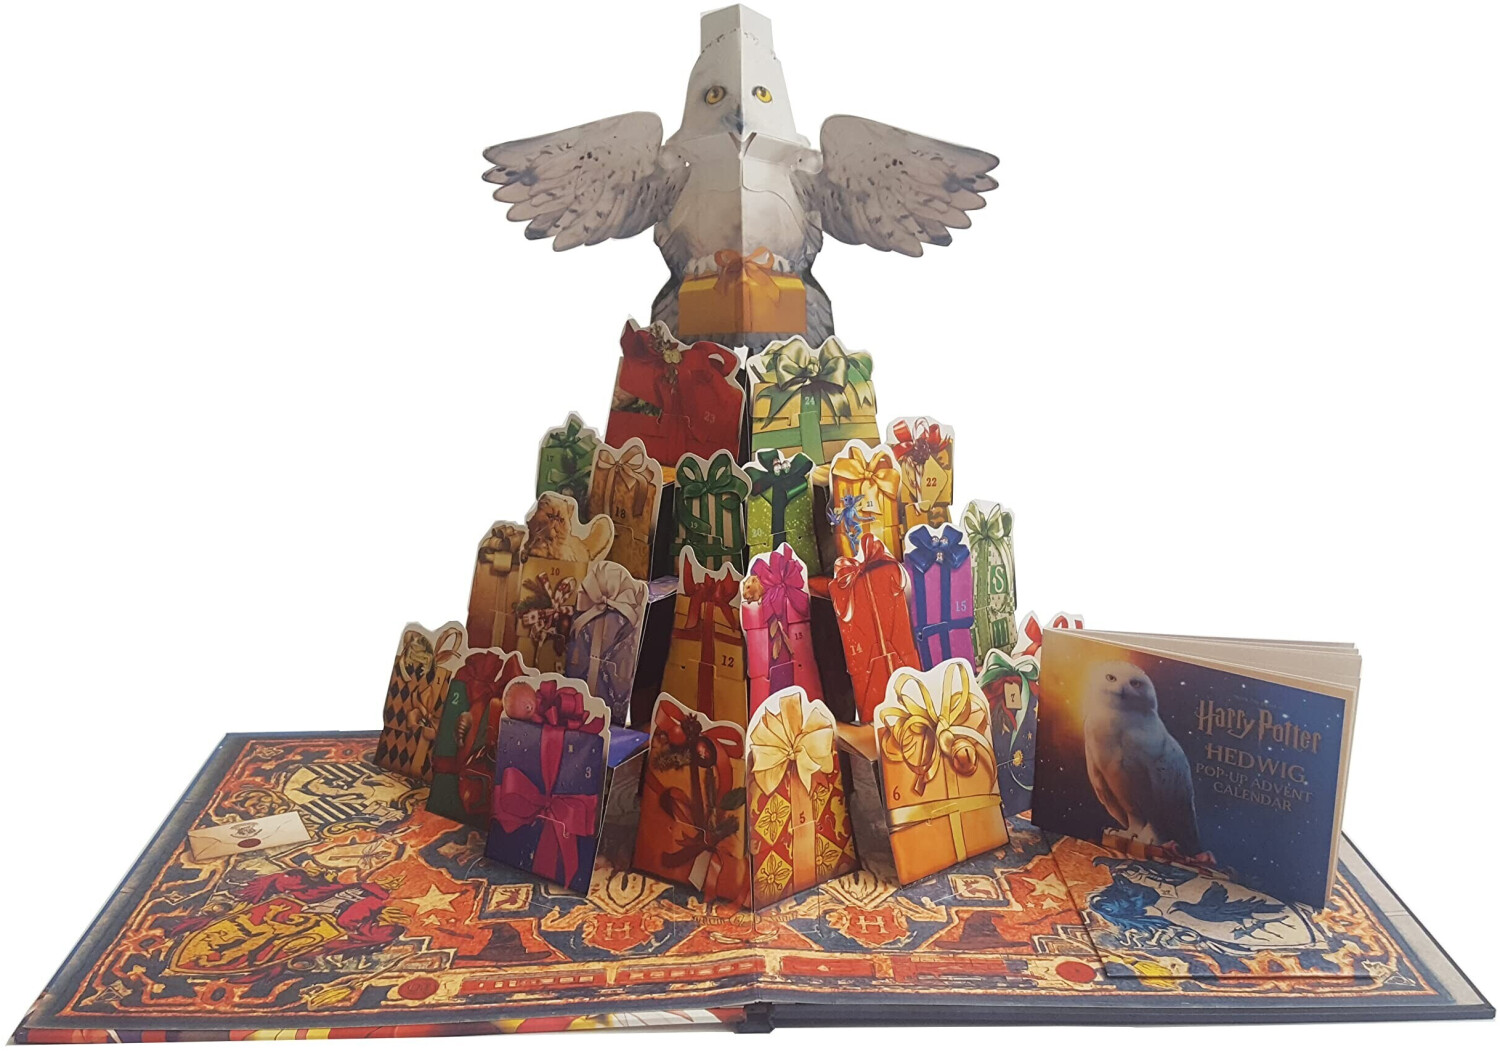 Buy Titan Books Harry Potter Hedwig Popup Advent Calendar from £21.99